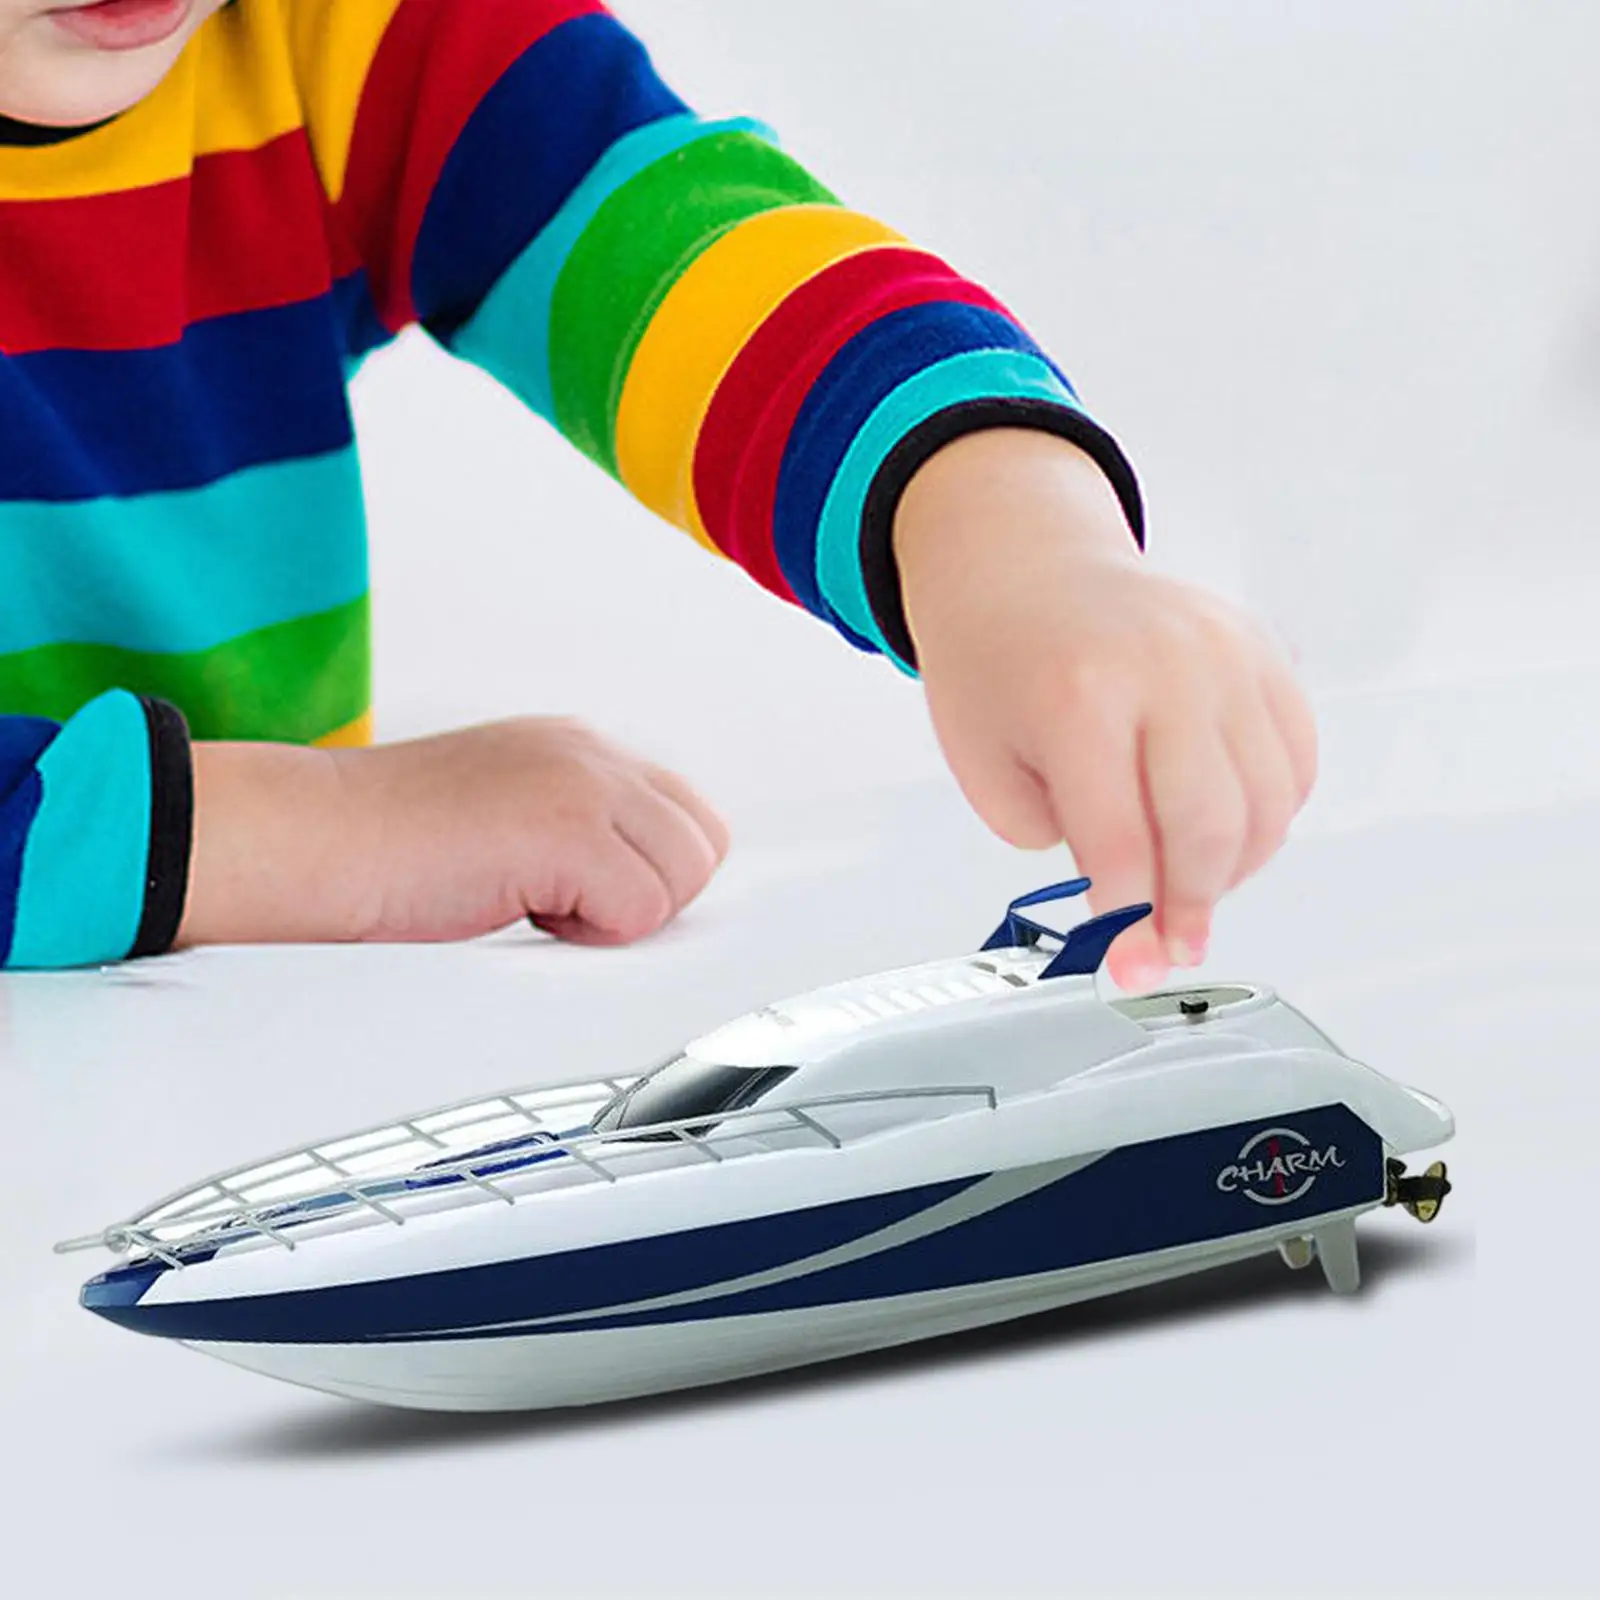 Portable Remote Control Boat Toy Speedboat for Beginner Kids Birthday Gifts